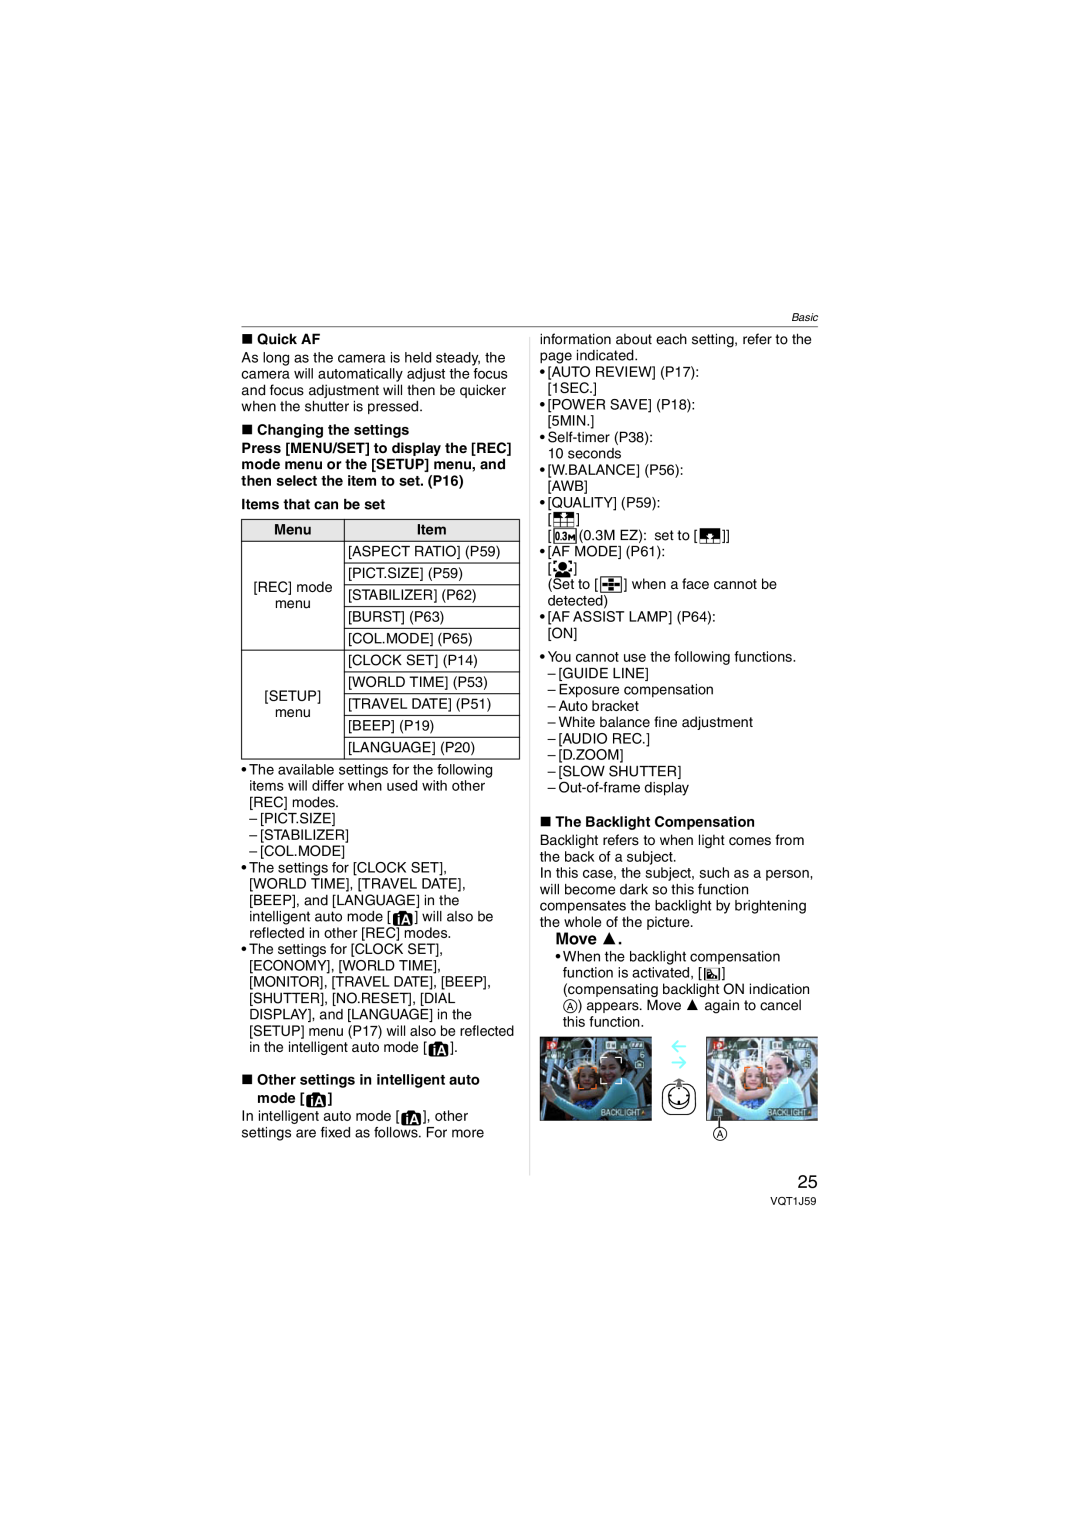 Panasonic DMC-FX55 operating instructions Move, ∫ Quick AF, ∫ Changing the settings, Items that can be set, Menu 